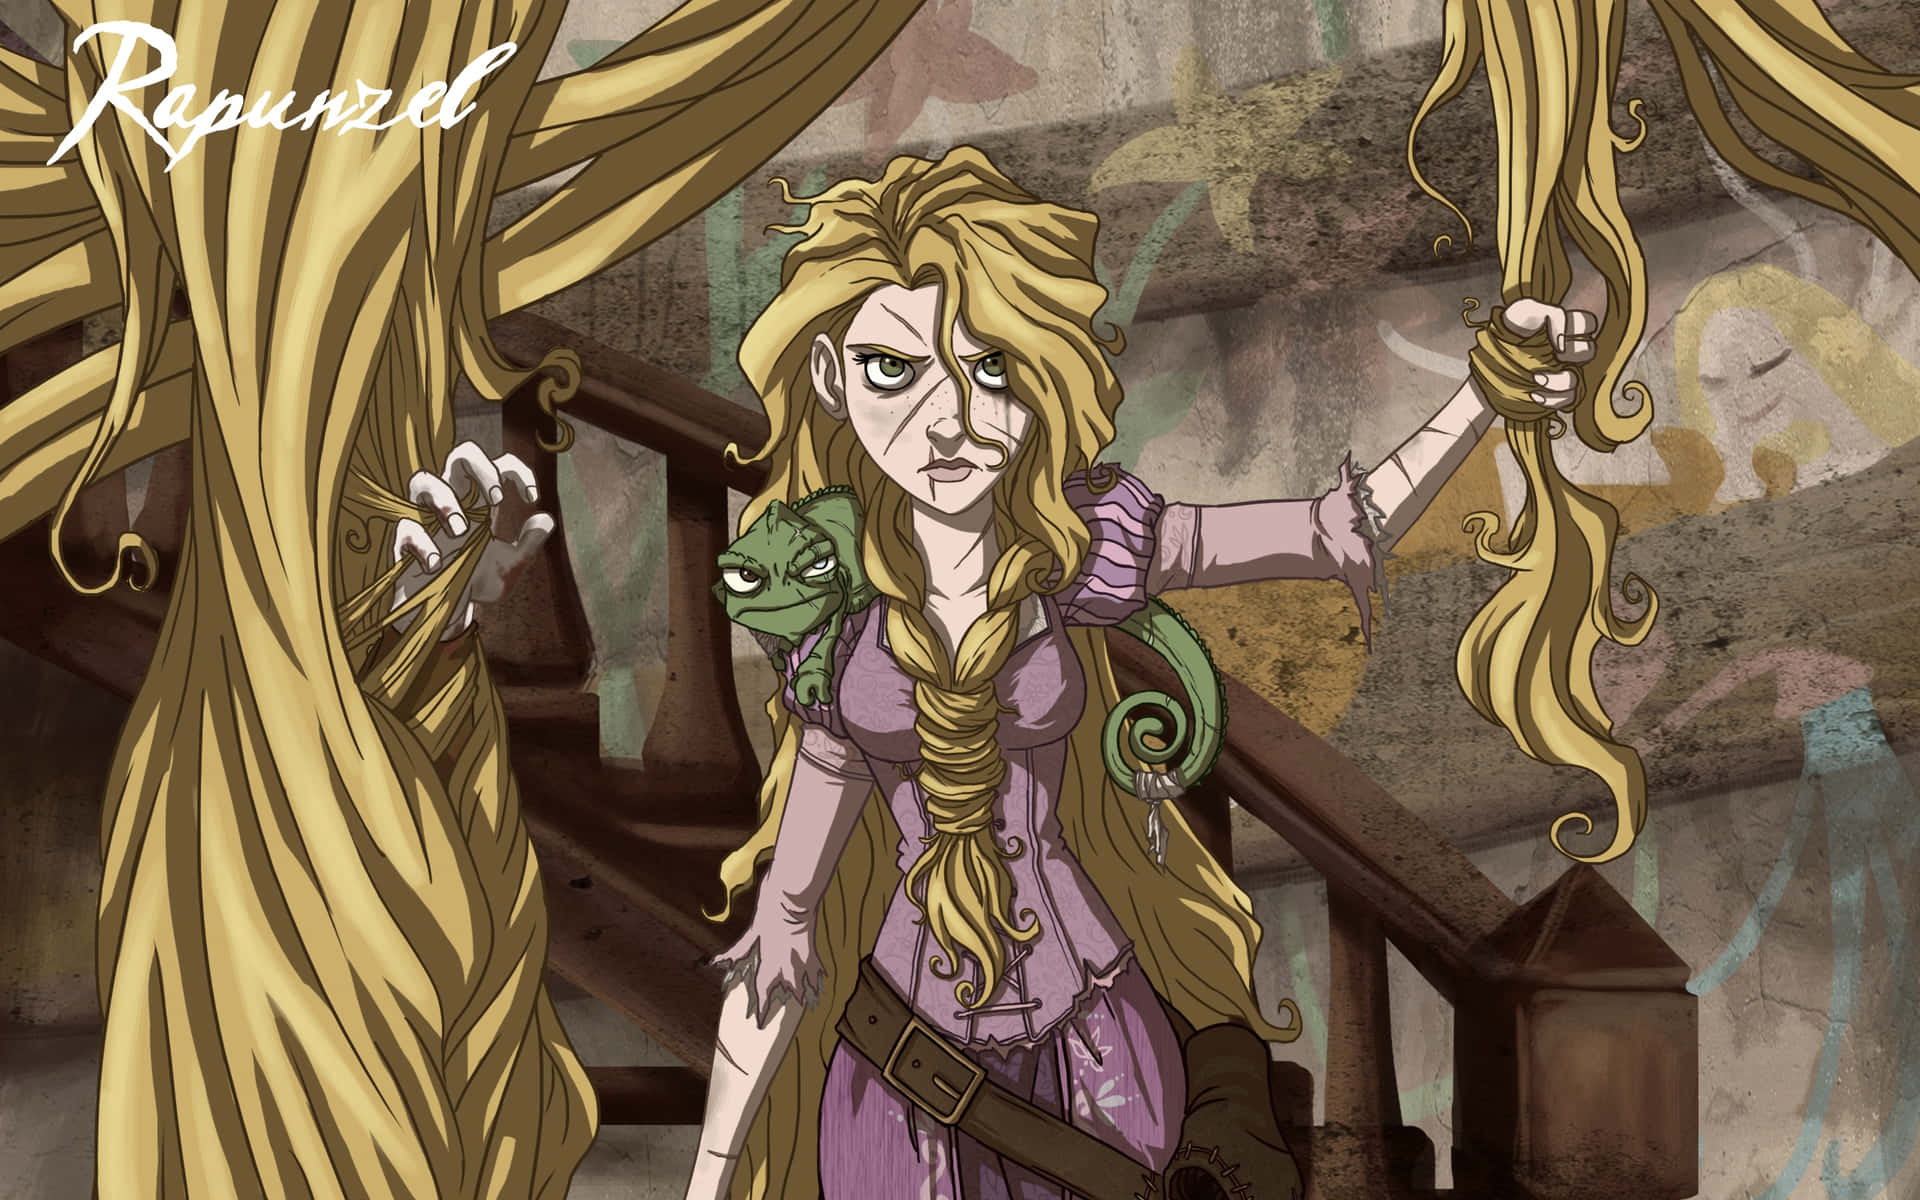 Rapunzel standing on a balcony with her long golden hair flowing in the wind